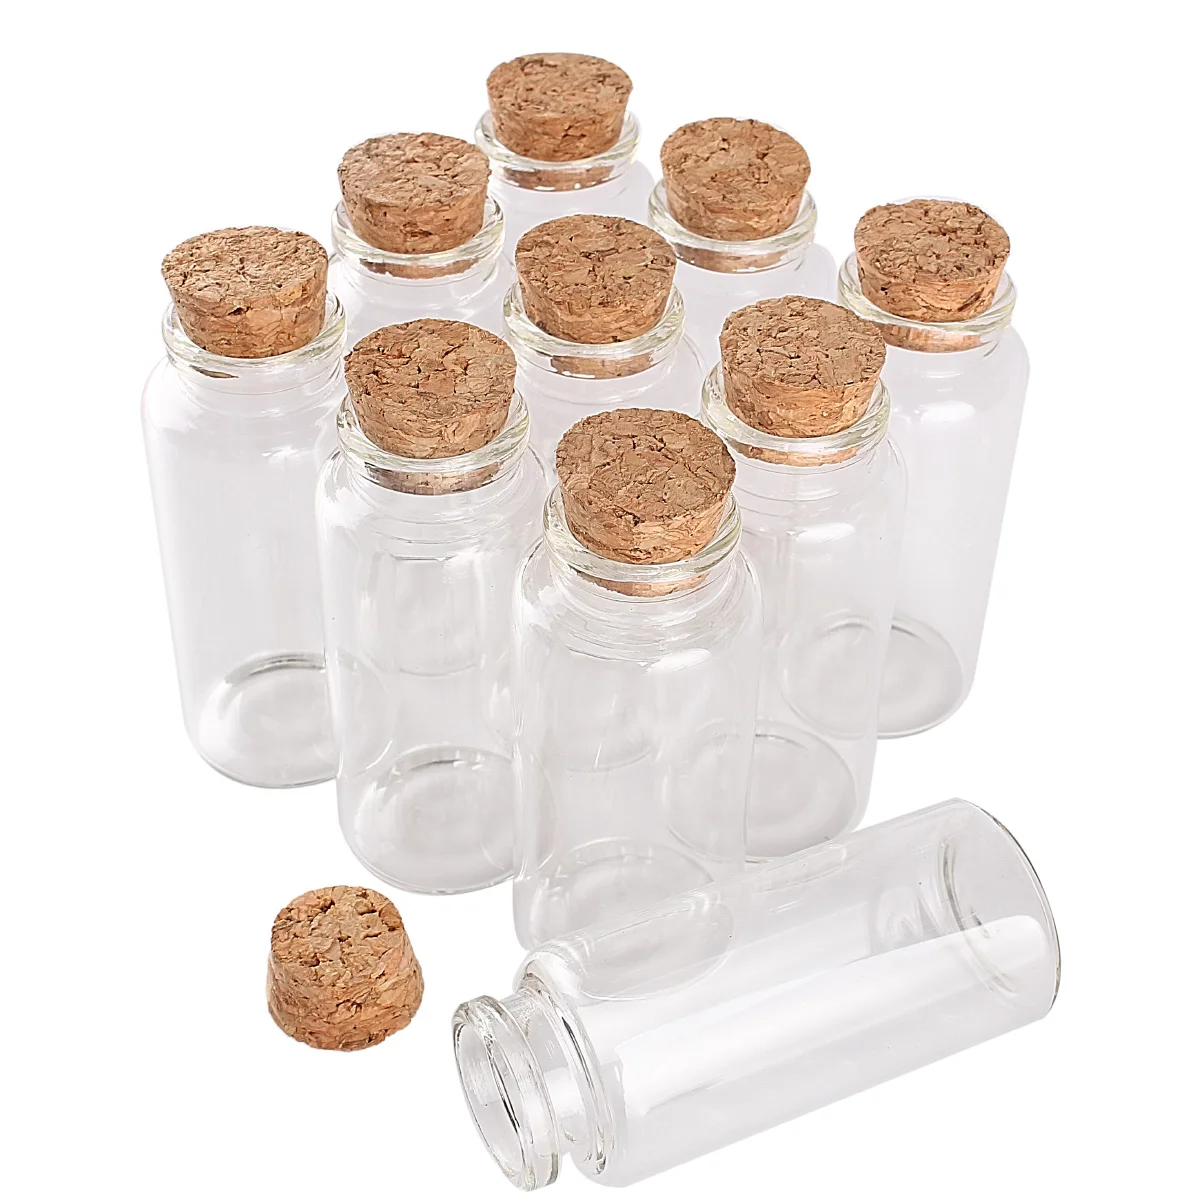 100 Pieces 30ml Glass Bottles with Cork Stopper 30*70mm Spice Glass Jars Vials Wishing Decorative Bottles for Wedding Favors